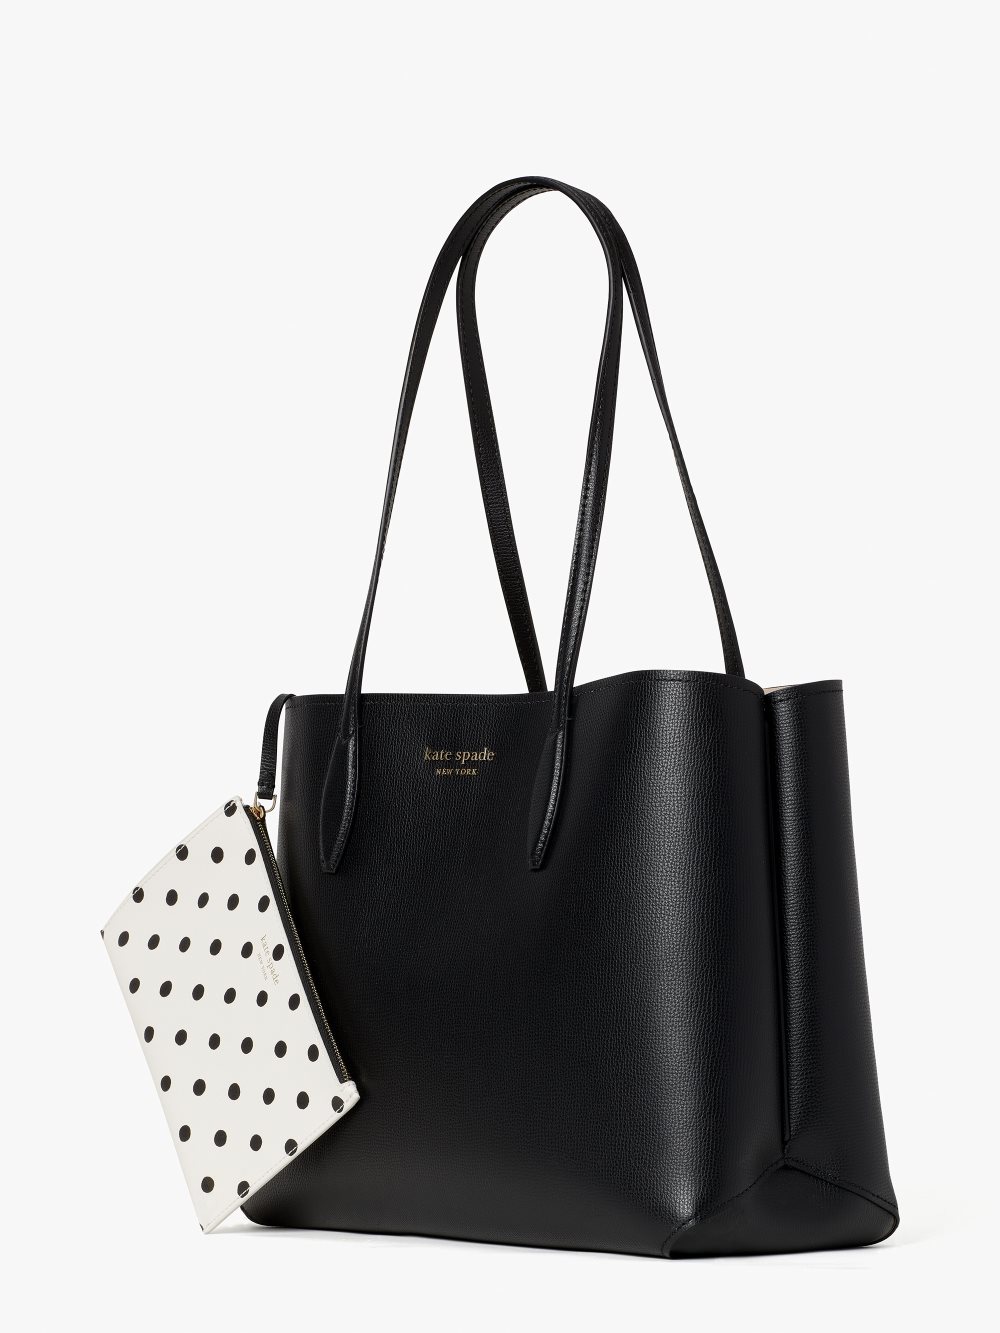 Women's black/black all day large tote | Kate Spade